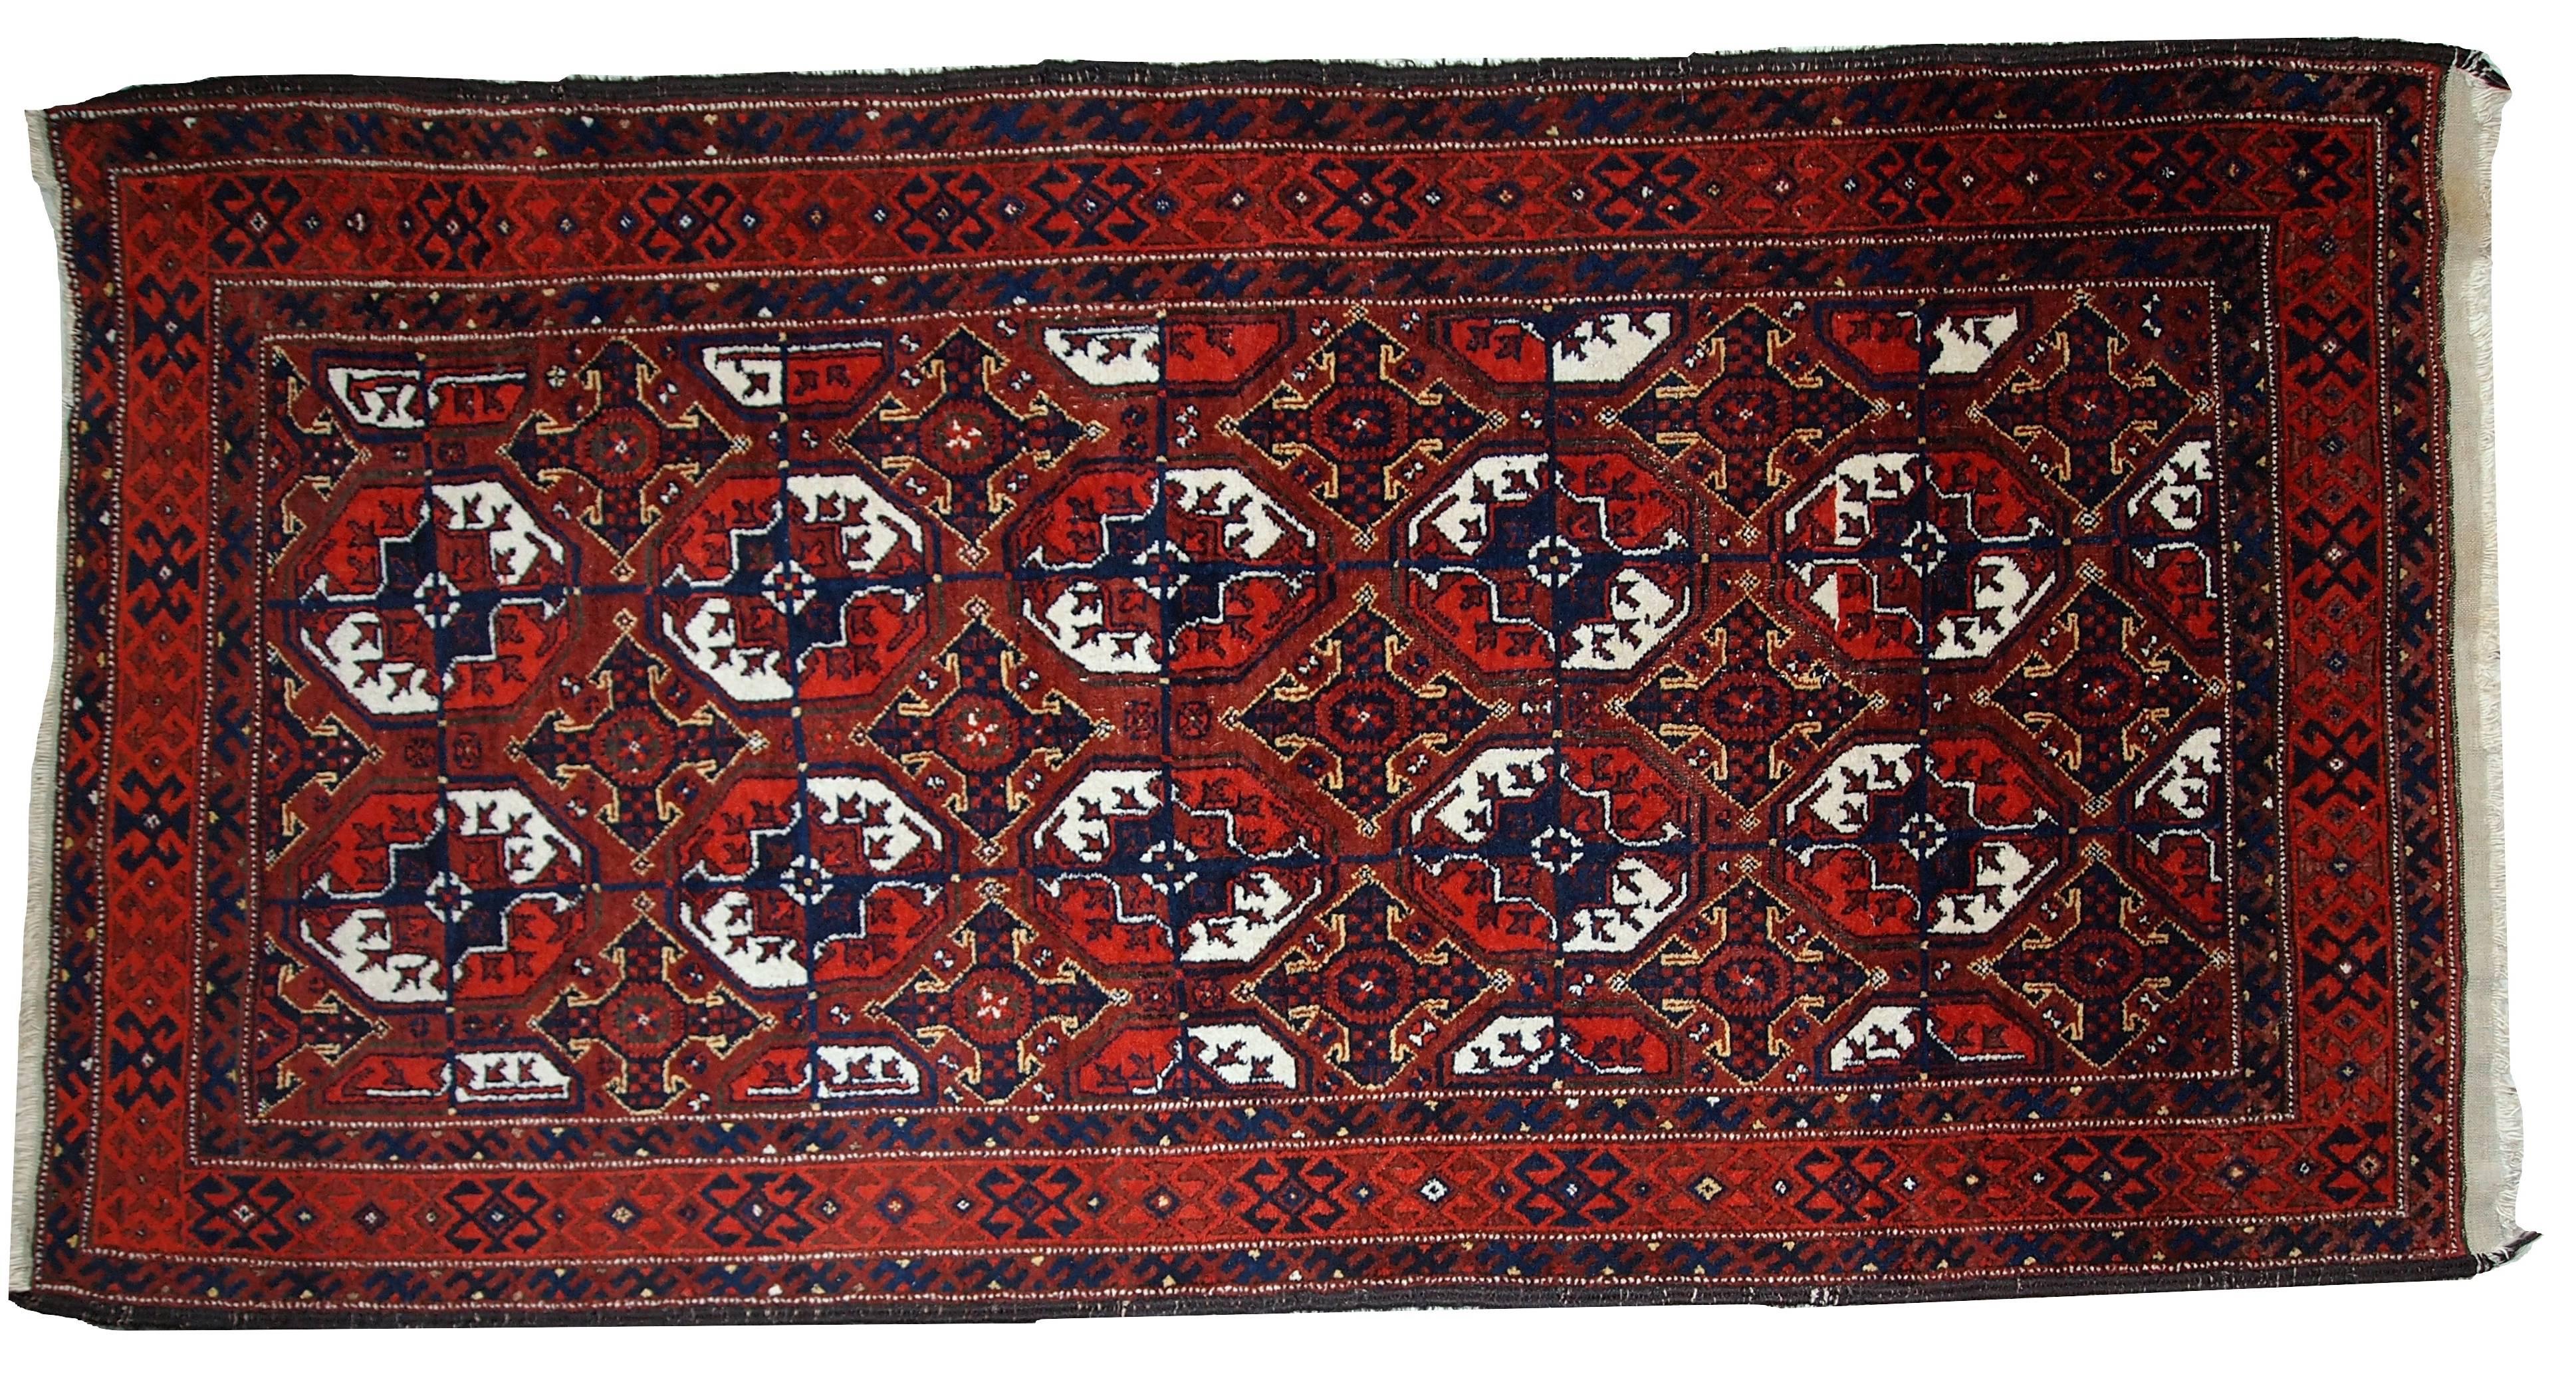 Antique handmade Afghan Baluch rug. This Afghan rug has beautiful bright colors of red, white, burgundy, and blue. Very nice repeating design in the center and tribal border around. The condition of this rug is original and good. It has nice, soft